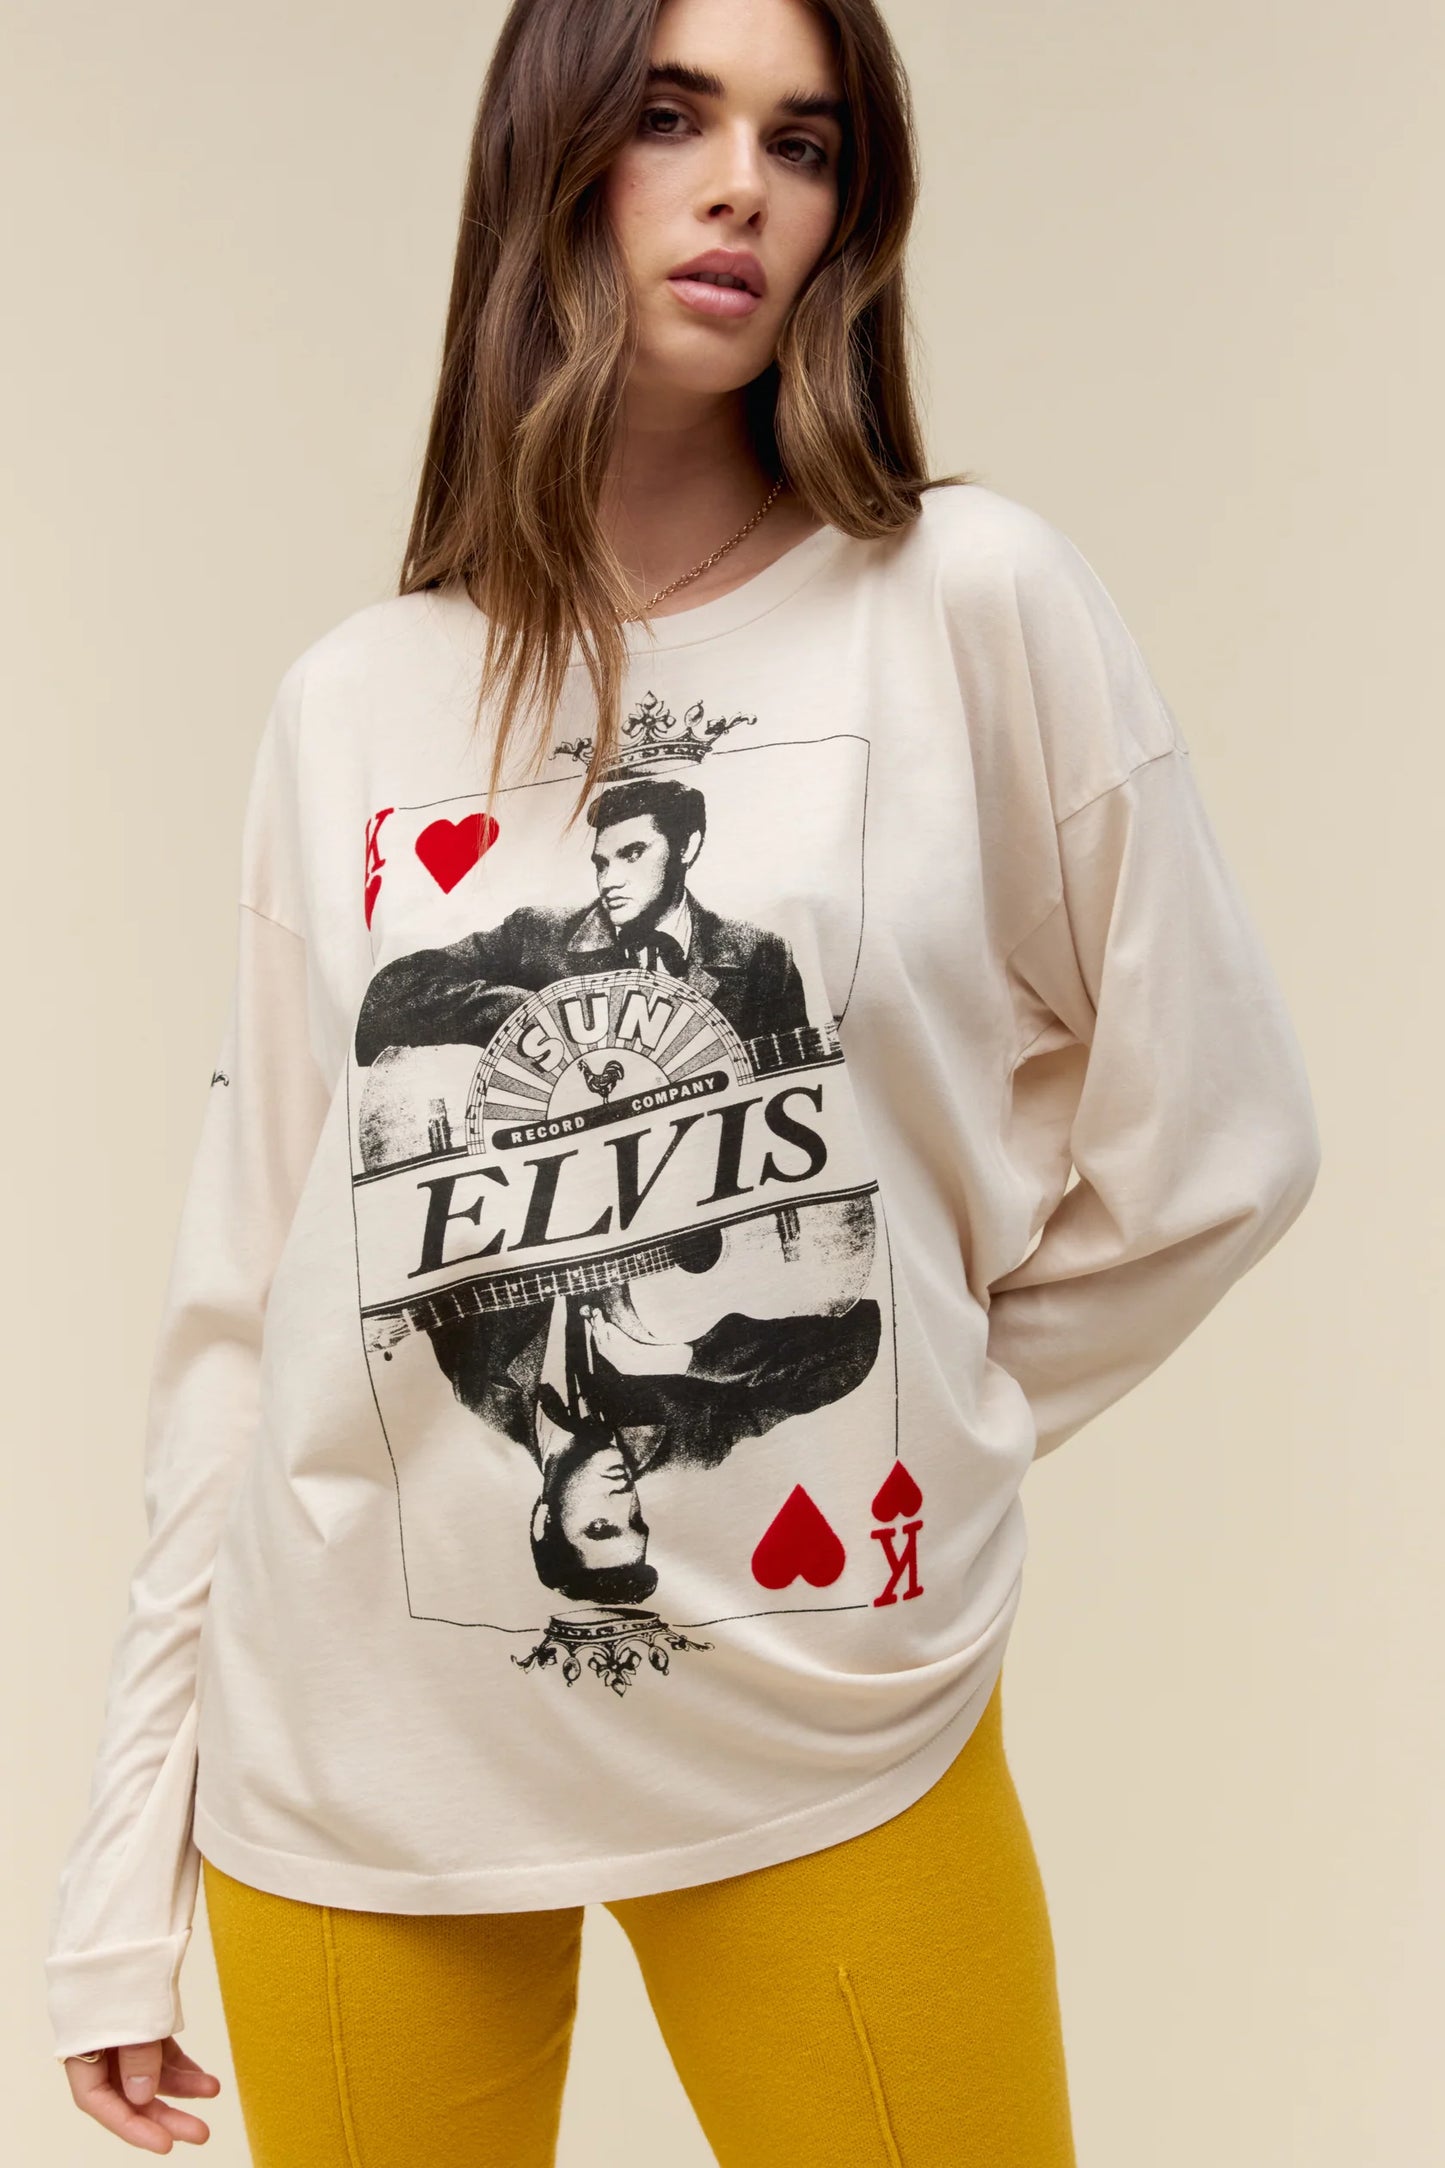 SUN RECORDS X ELVIS KING OF HEARTS